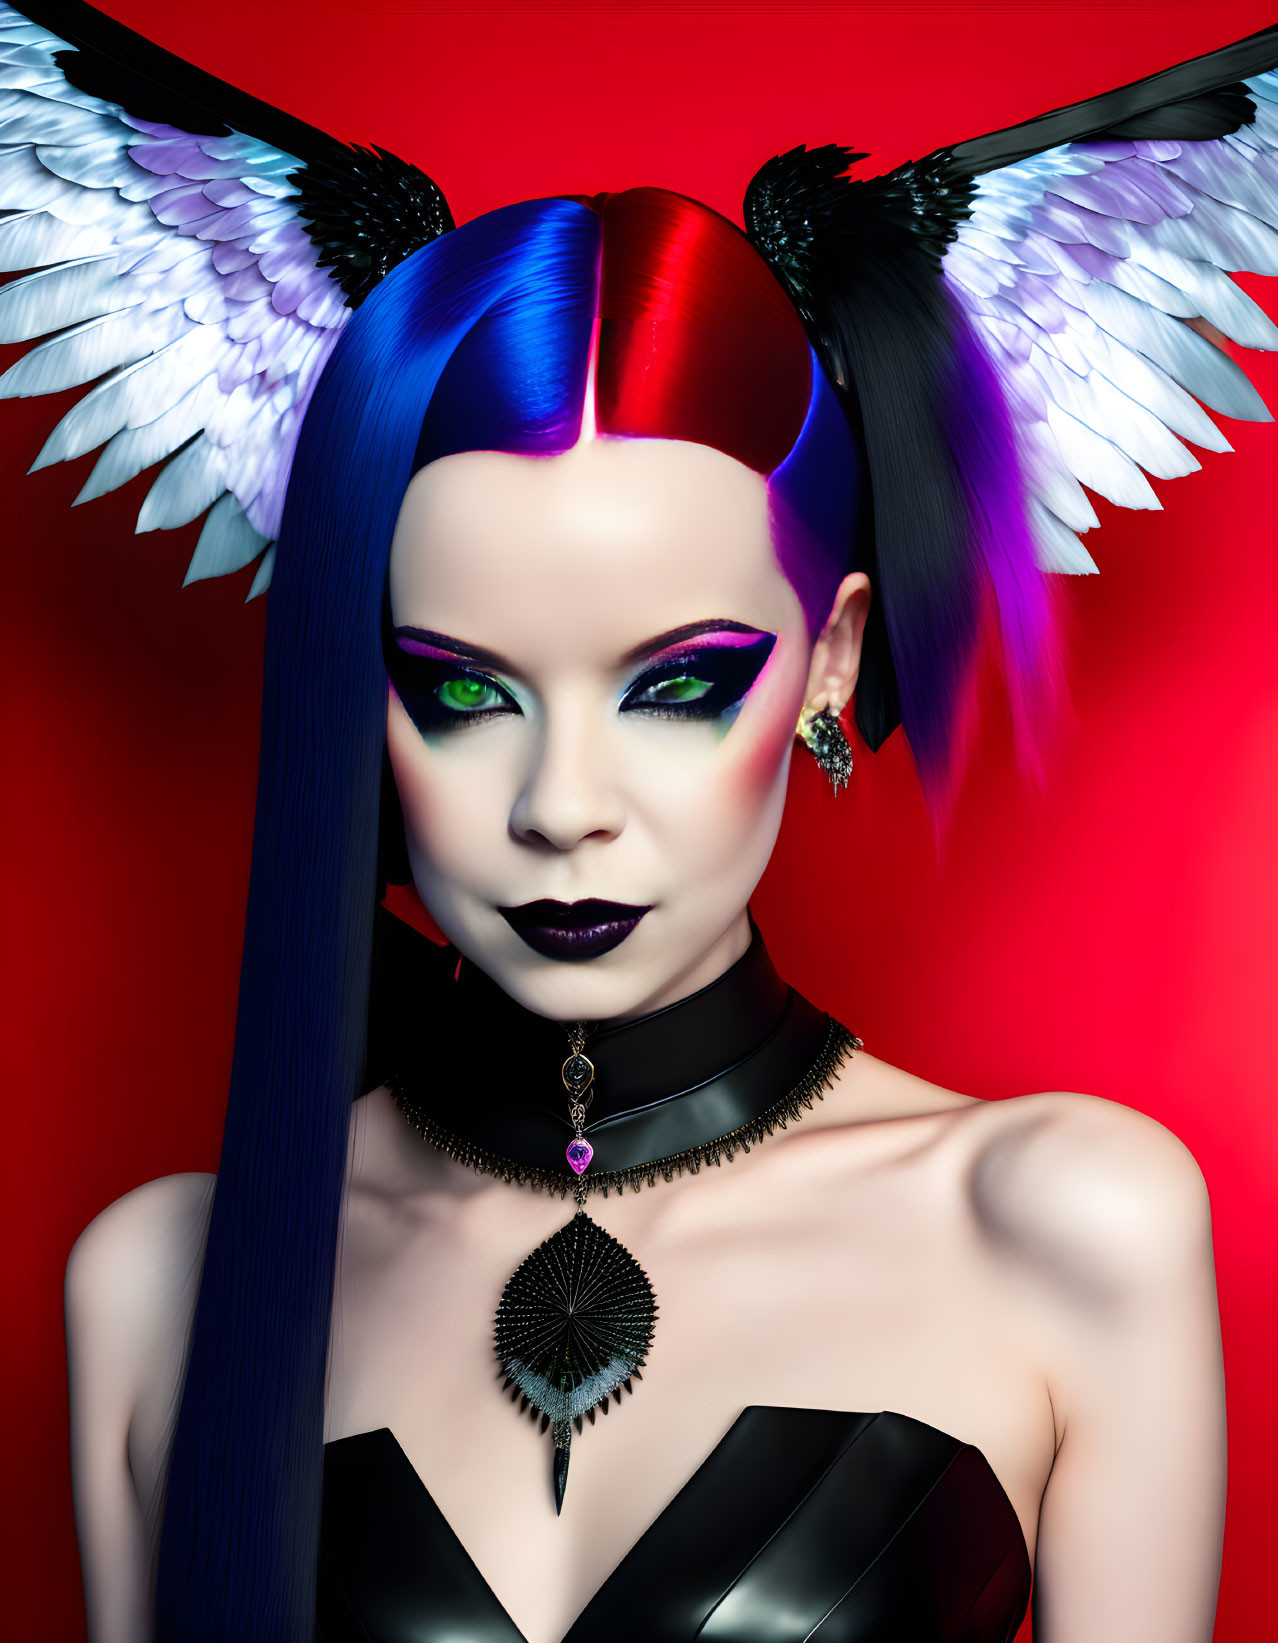 Split Blue and Red Hair Woman with Dramatic Makeup and Black/White Wings on Red Background